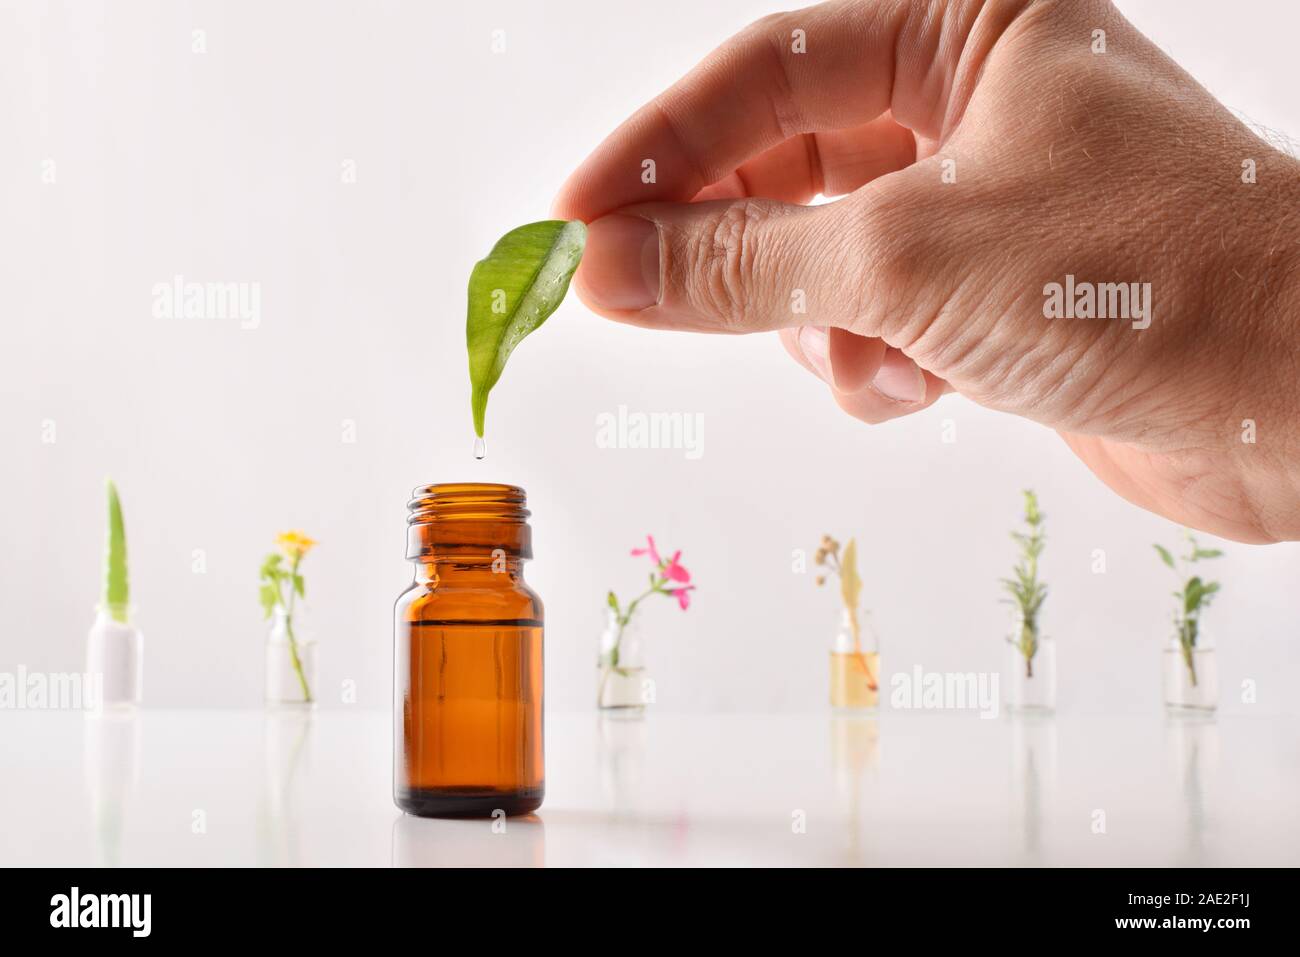 Natural medicine concept with hand with leaf and drop falling into glass jar and bottles with plant essence on table and white background. Horizontal Stock Photo